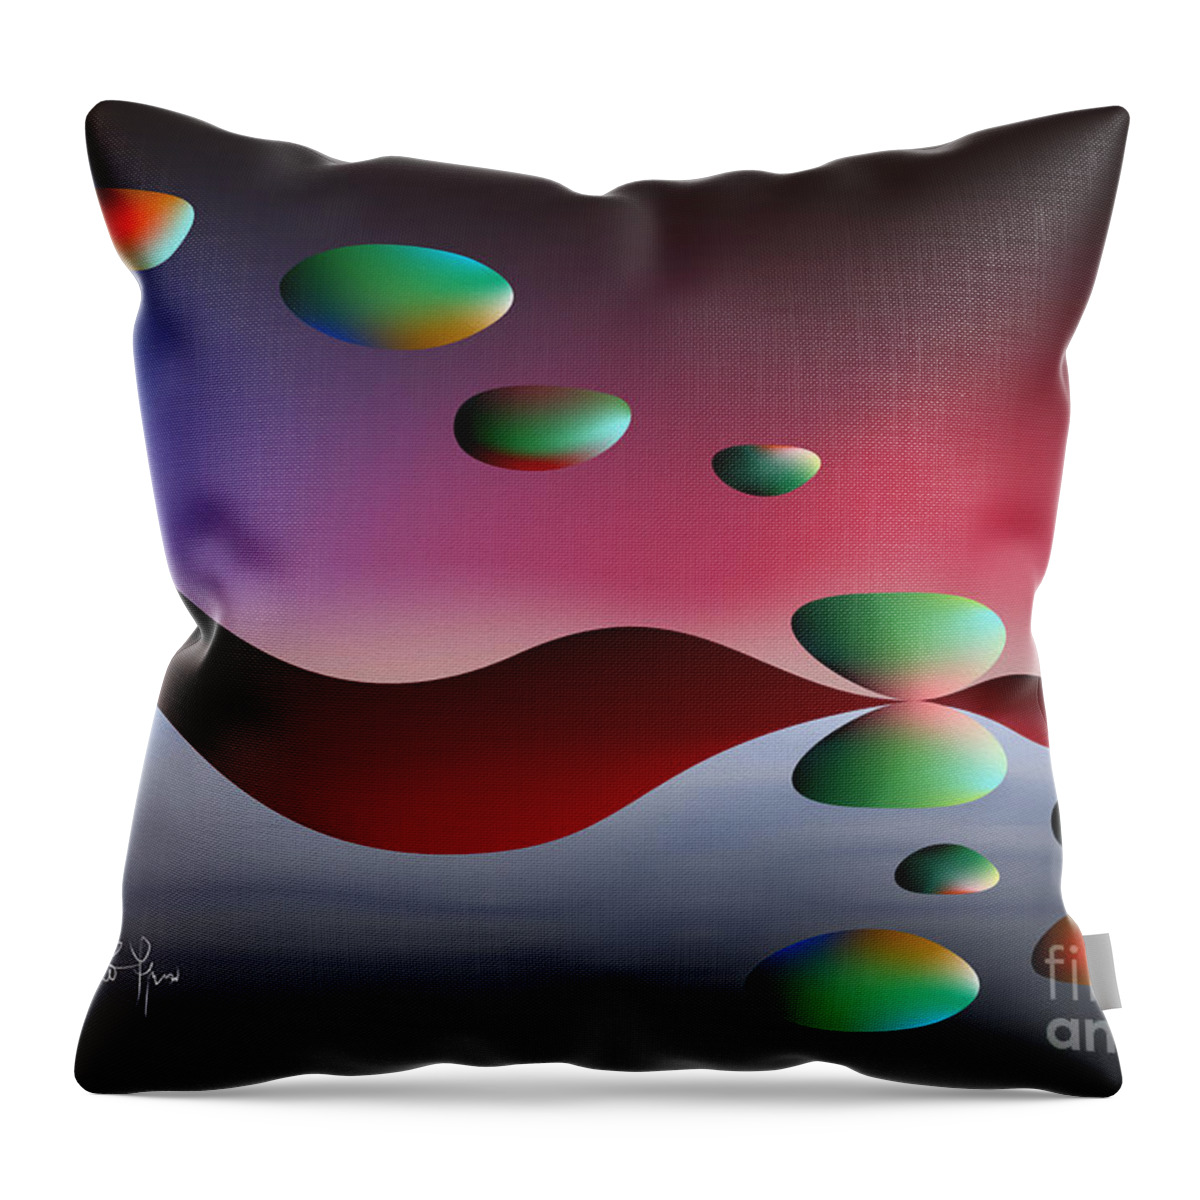 Live Throw Pillow featuring the digital art Parallel Lives by Leo Symon